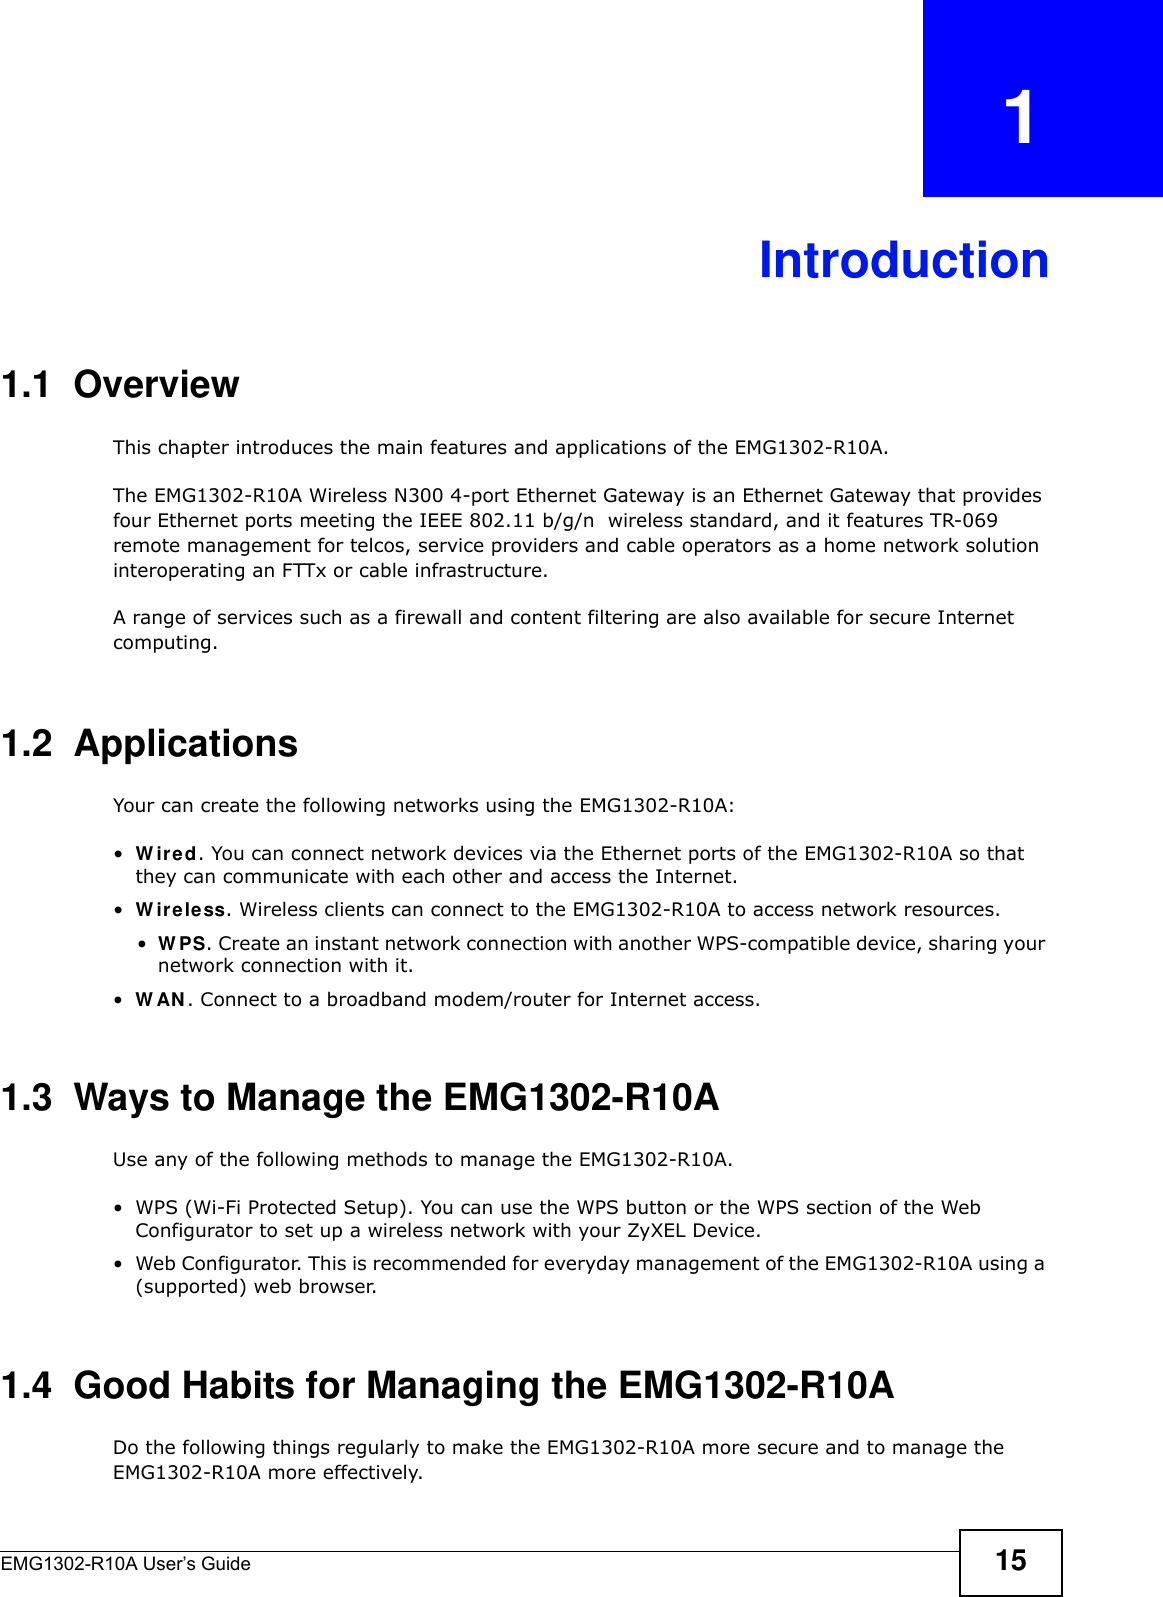 EMG1302-R10A User’s Guide 15CHAPTER   1Introduction1.1  OverviewThis chapter introduces the main features and applications of the EMG1302-R10A.The EMG1302-R10A Wireless N300 4-port Ethernet Gateway is an Ethernet Gateway that provides four Ethernet ports meeting the IEEE 802.11 b/g/n  wireless standard, and it features TR-069 remote management for telcos, service providers and cable operators as a home network solution interoperating an FTTx or cable infrastructure.A range of services such as a firewall and content filtering are also available for secure Internet computing. 1.2  ApplicationsYour can create the following networks using the EMG1302-R10A:•W ir e d. You can connect network devices via the Ethernet ports of the EMG1302-R10A so that they can communicate with each other and access the Internet.•W ire less. Wireless clients can connect to the EMG1302-R10A to access network resources.•W PS. Create an instant network connection with another WPS-compatible device, sharing your network connection with it.•W AN . Connect to a broadband modem/router for Internet access.1.3  Ways to Manage the EMG1302-R10AUse any of the following methods to manage the EMG1302-R10A.• WPS (Wi-Fi Protected Setup). You can use the WPS button or the WPS section of the Web Configurator to set up a wireless network with your ZyXEL Device.• Web Configurator. This is recommended for everyday management of the EMG1302-R10A using a (supported) web browser.1.4  Good Habits for Managing the EMG1302-R10ADo the following things regularly to make the EMG1302-R10A more secure and to manage the EMG1302-R10A more effectively.